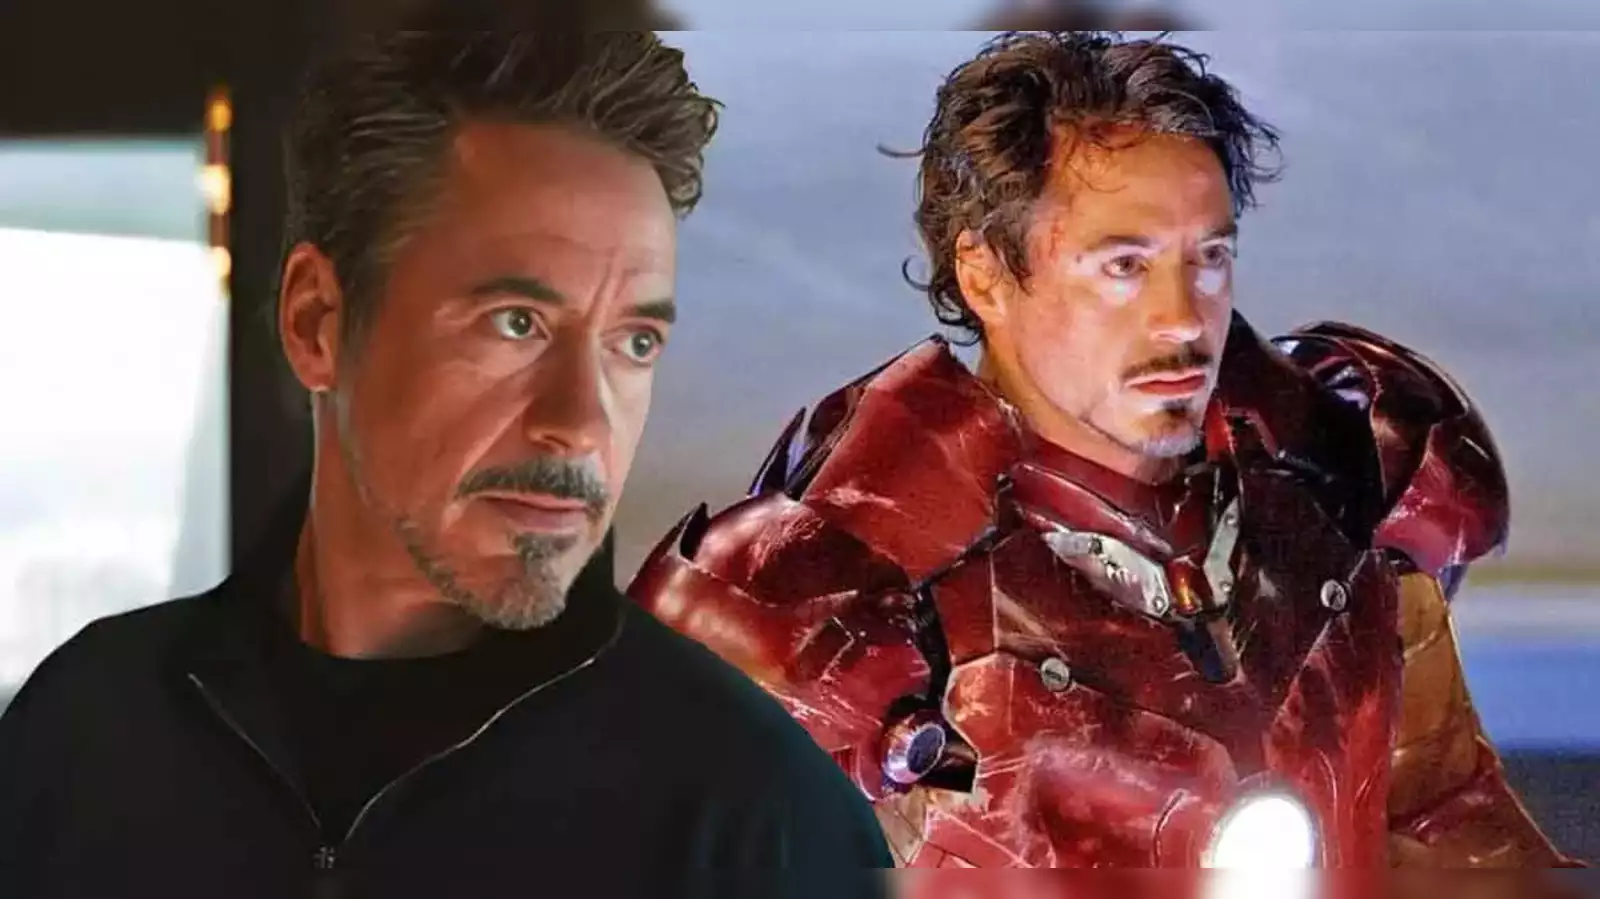 will iron man come back in avengers 5